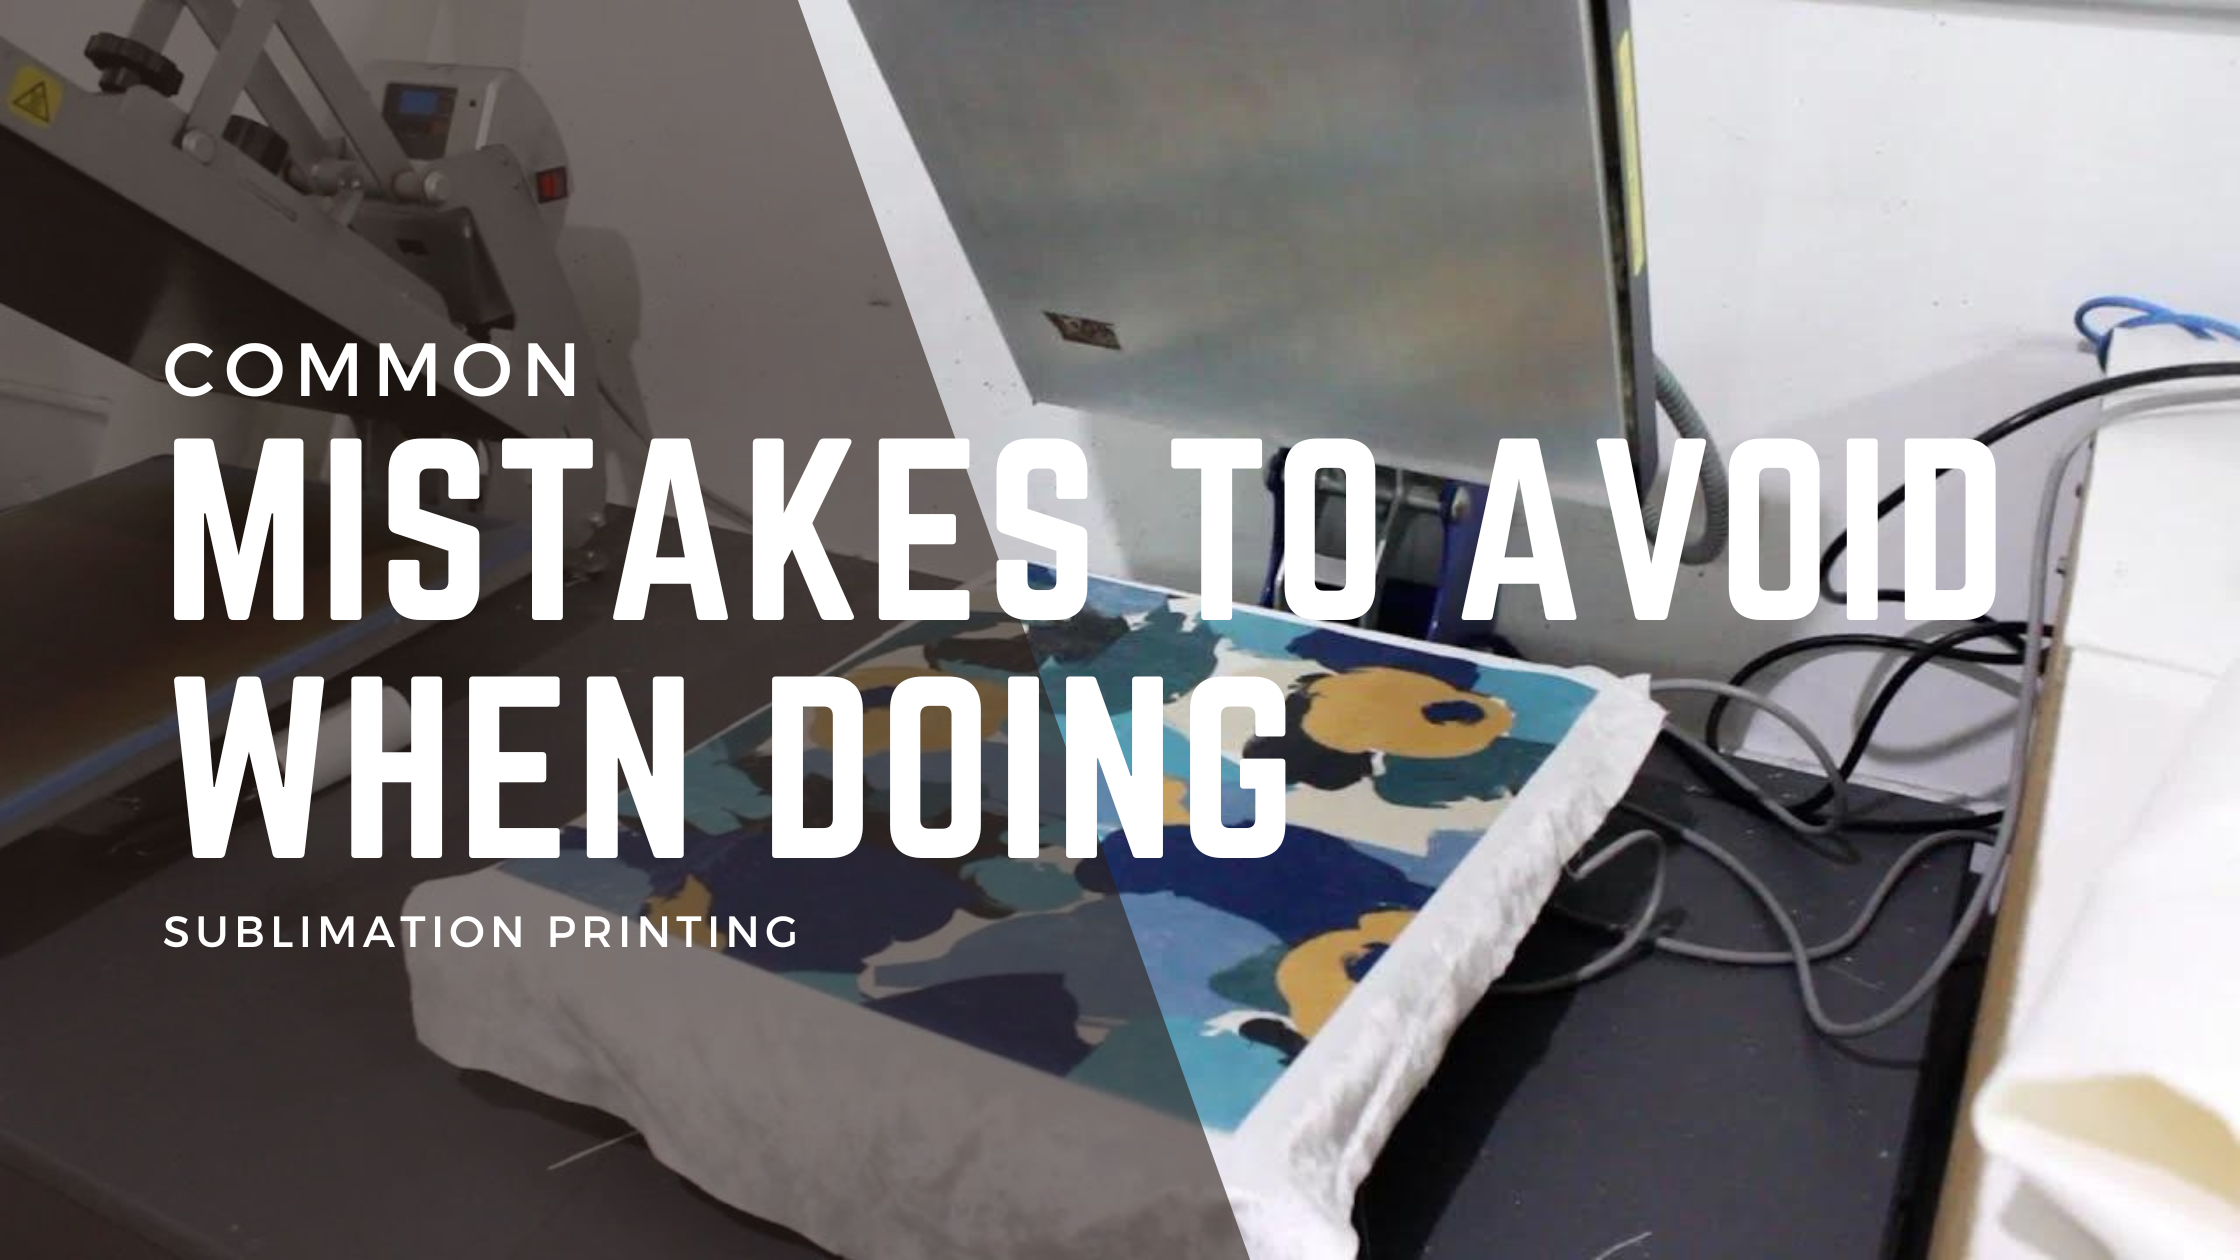 Common Mistakes to Avoid When Doing Sublimation Printing